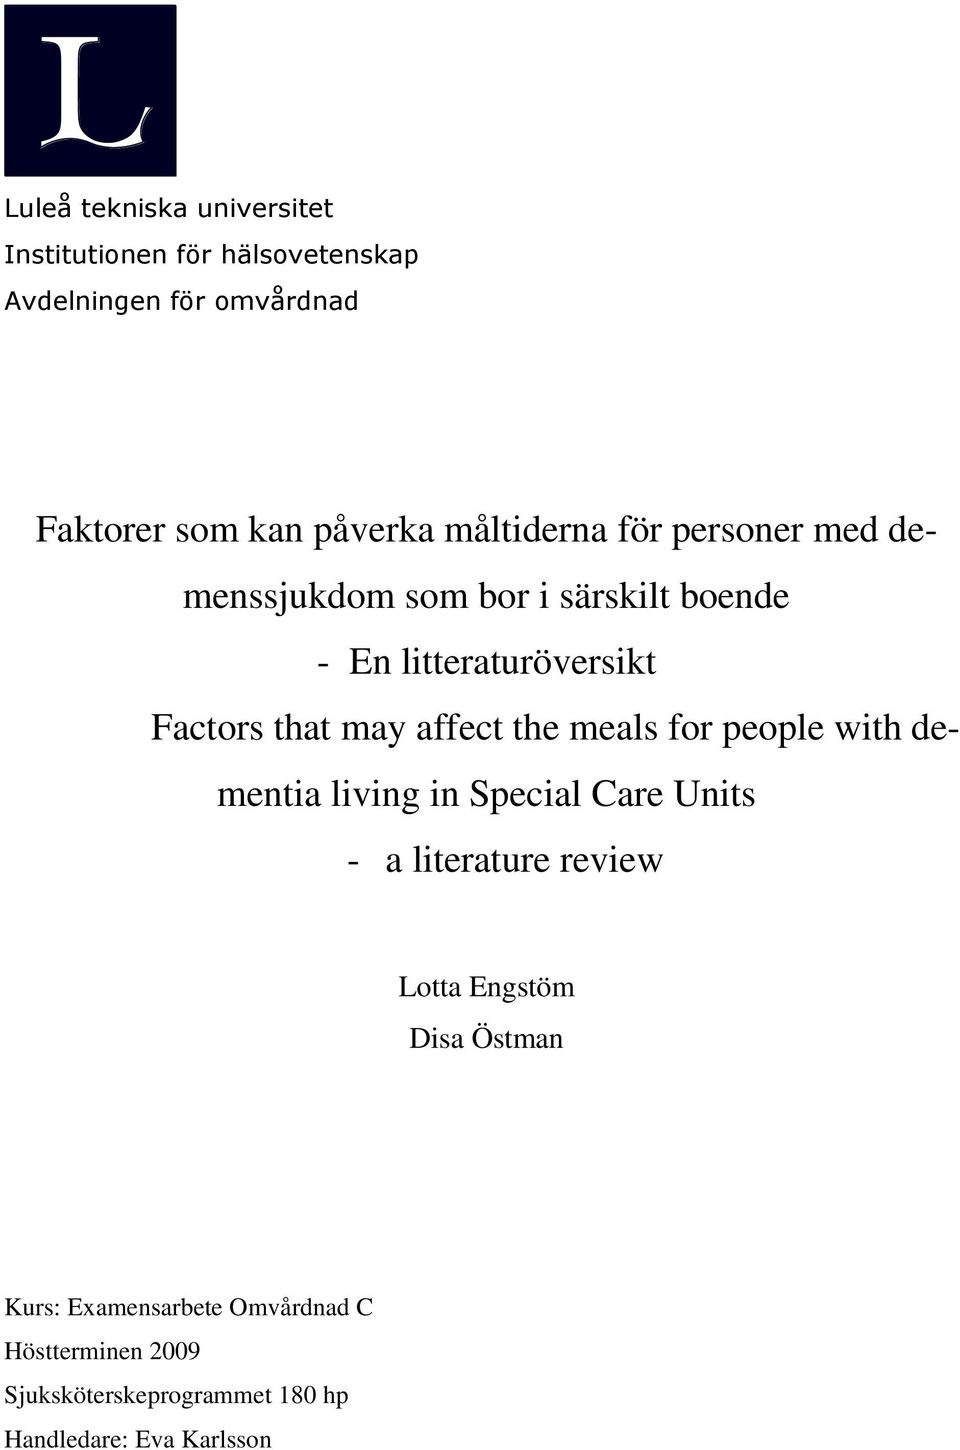 affect the meals for people with dementia living in Special Care Units - a literature review Lotta Engstöm